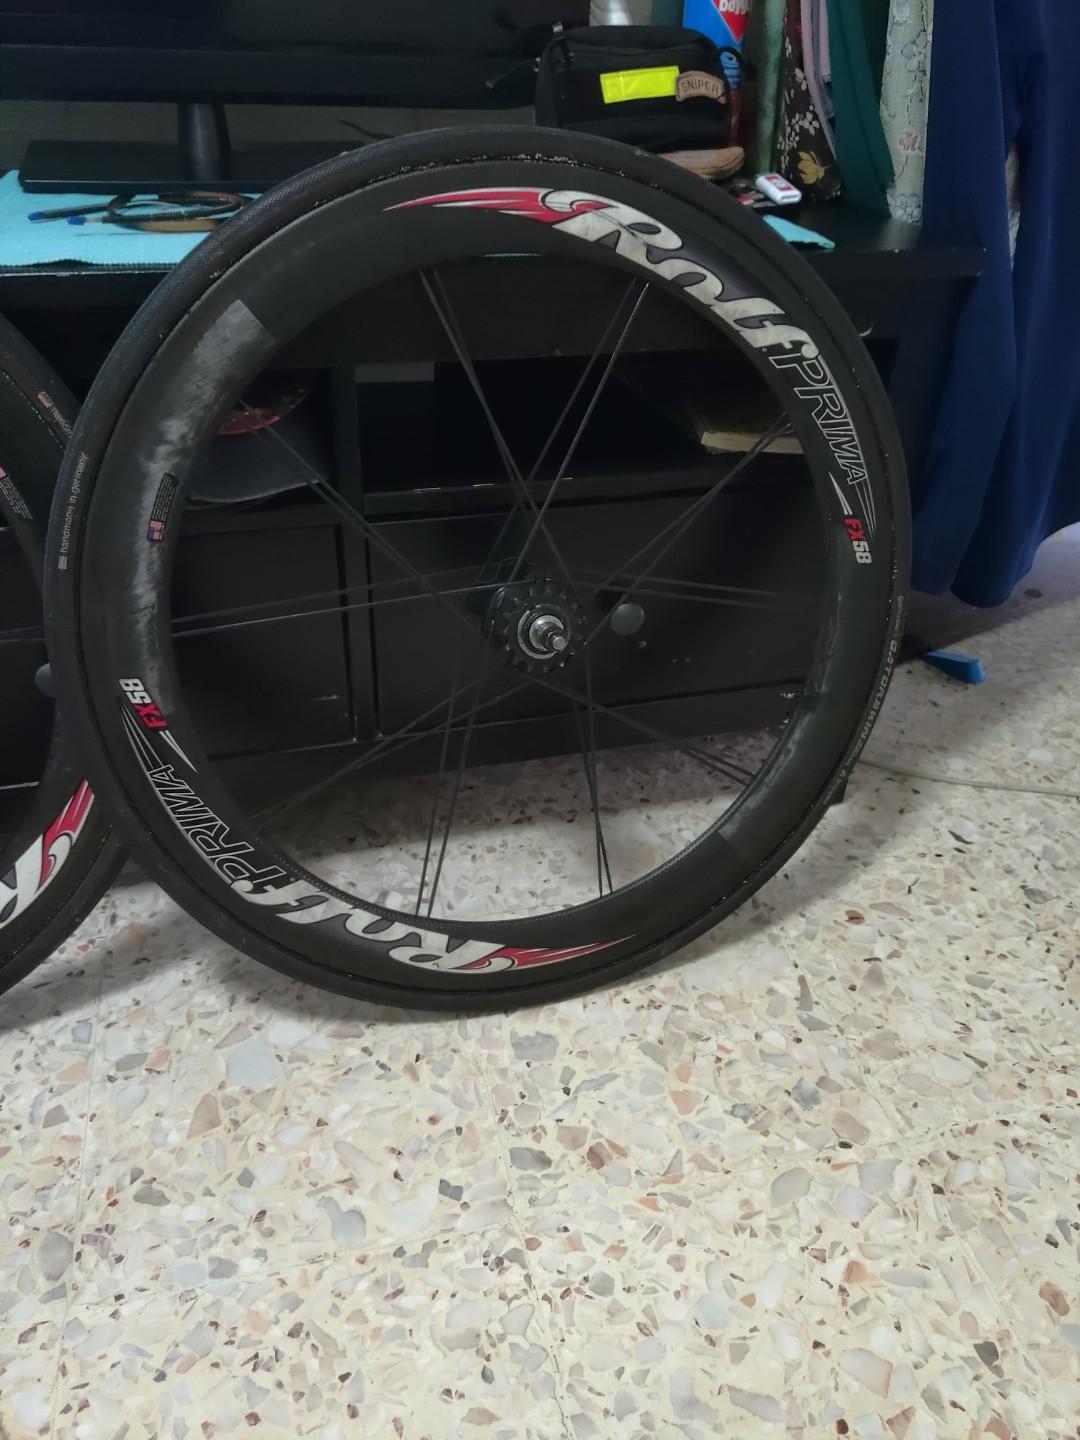 Rolf Prima Fx 58 Track Wheelset, Sports Equipment, Bicycles 